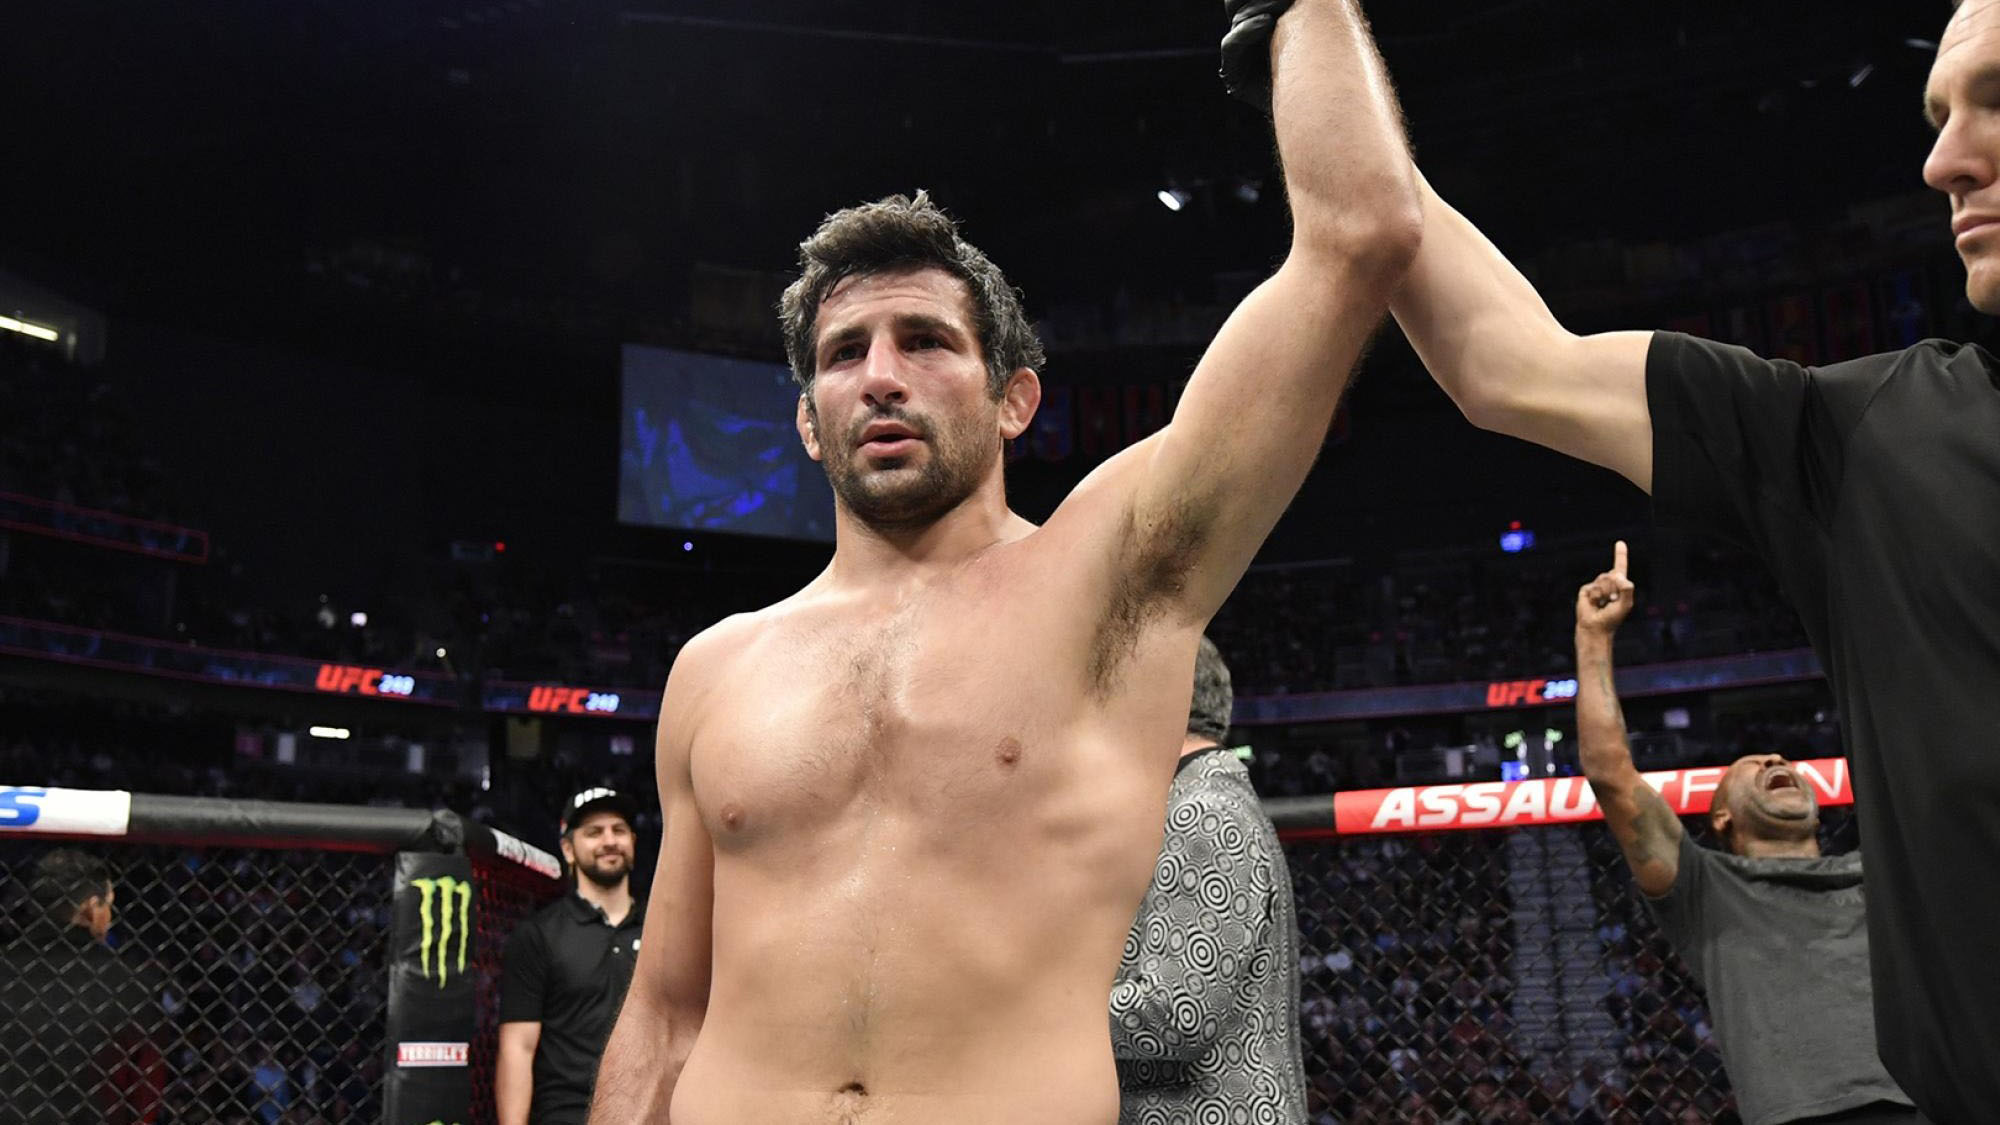 Beneil Khobier Dariush (born May 6, 1989) is an Iranian-born Assyrian-American professional mixed martial artist who competes in the Lightweight divis...